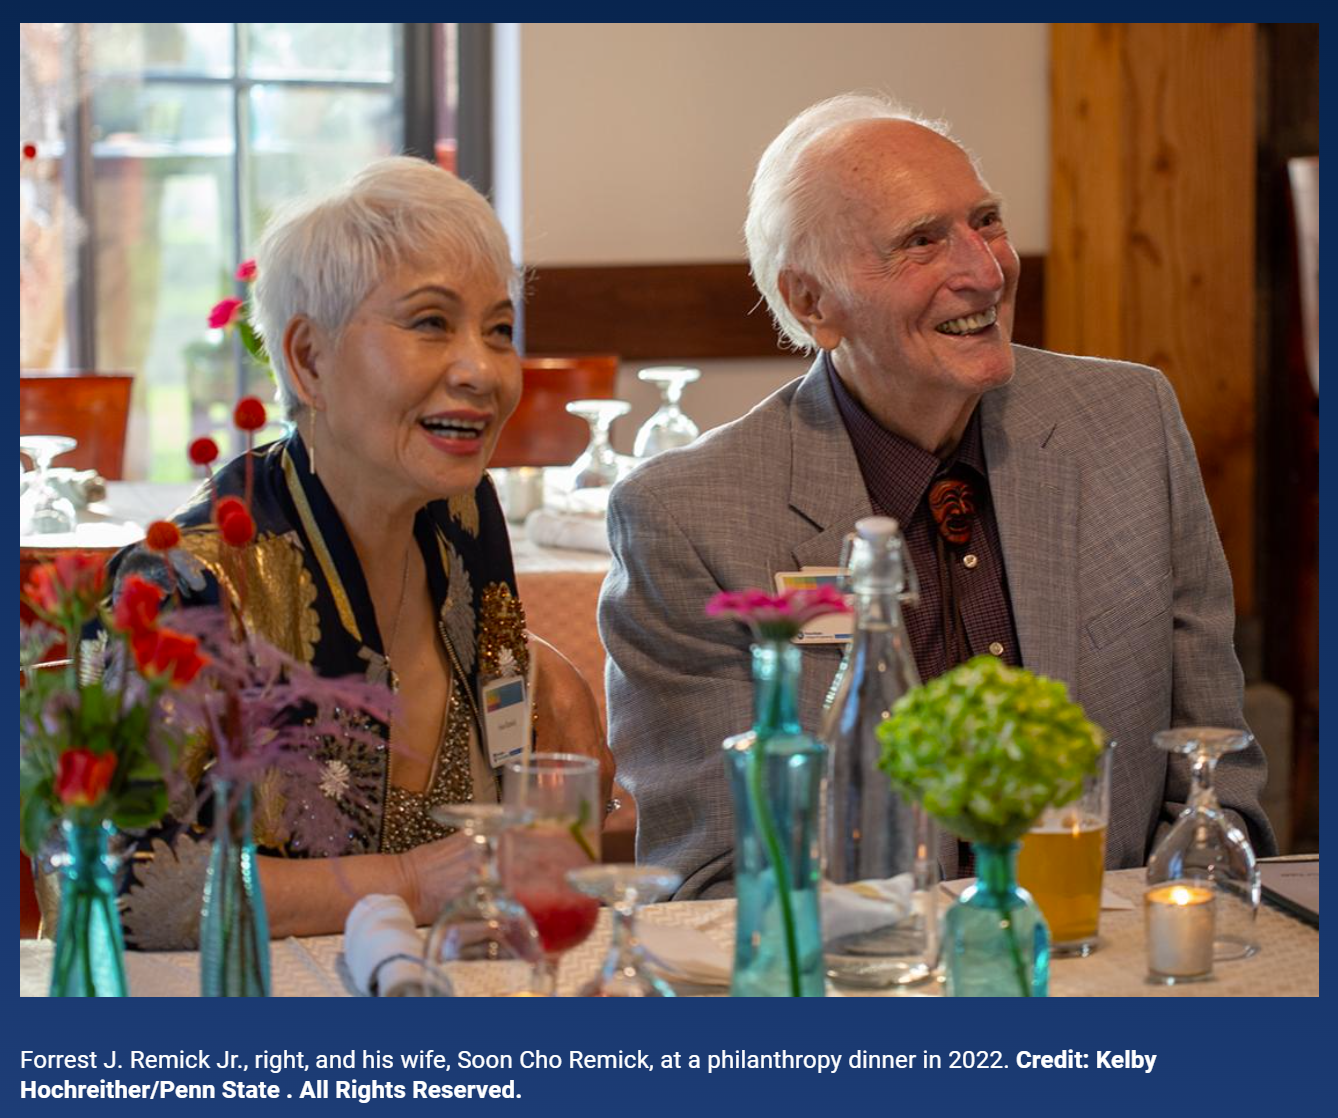 Forrest Remick and his wife, Soon Cho Remick, at a philanthropy dinner in 2022. Credit: Kelby Hochreither/Penn State.